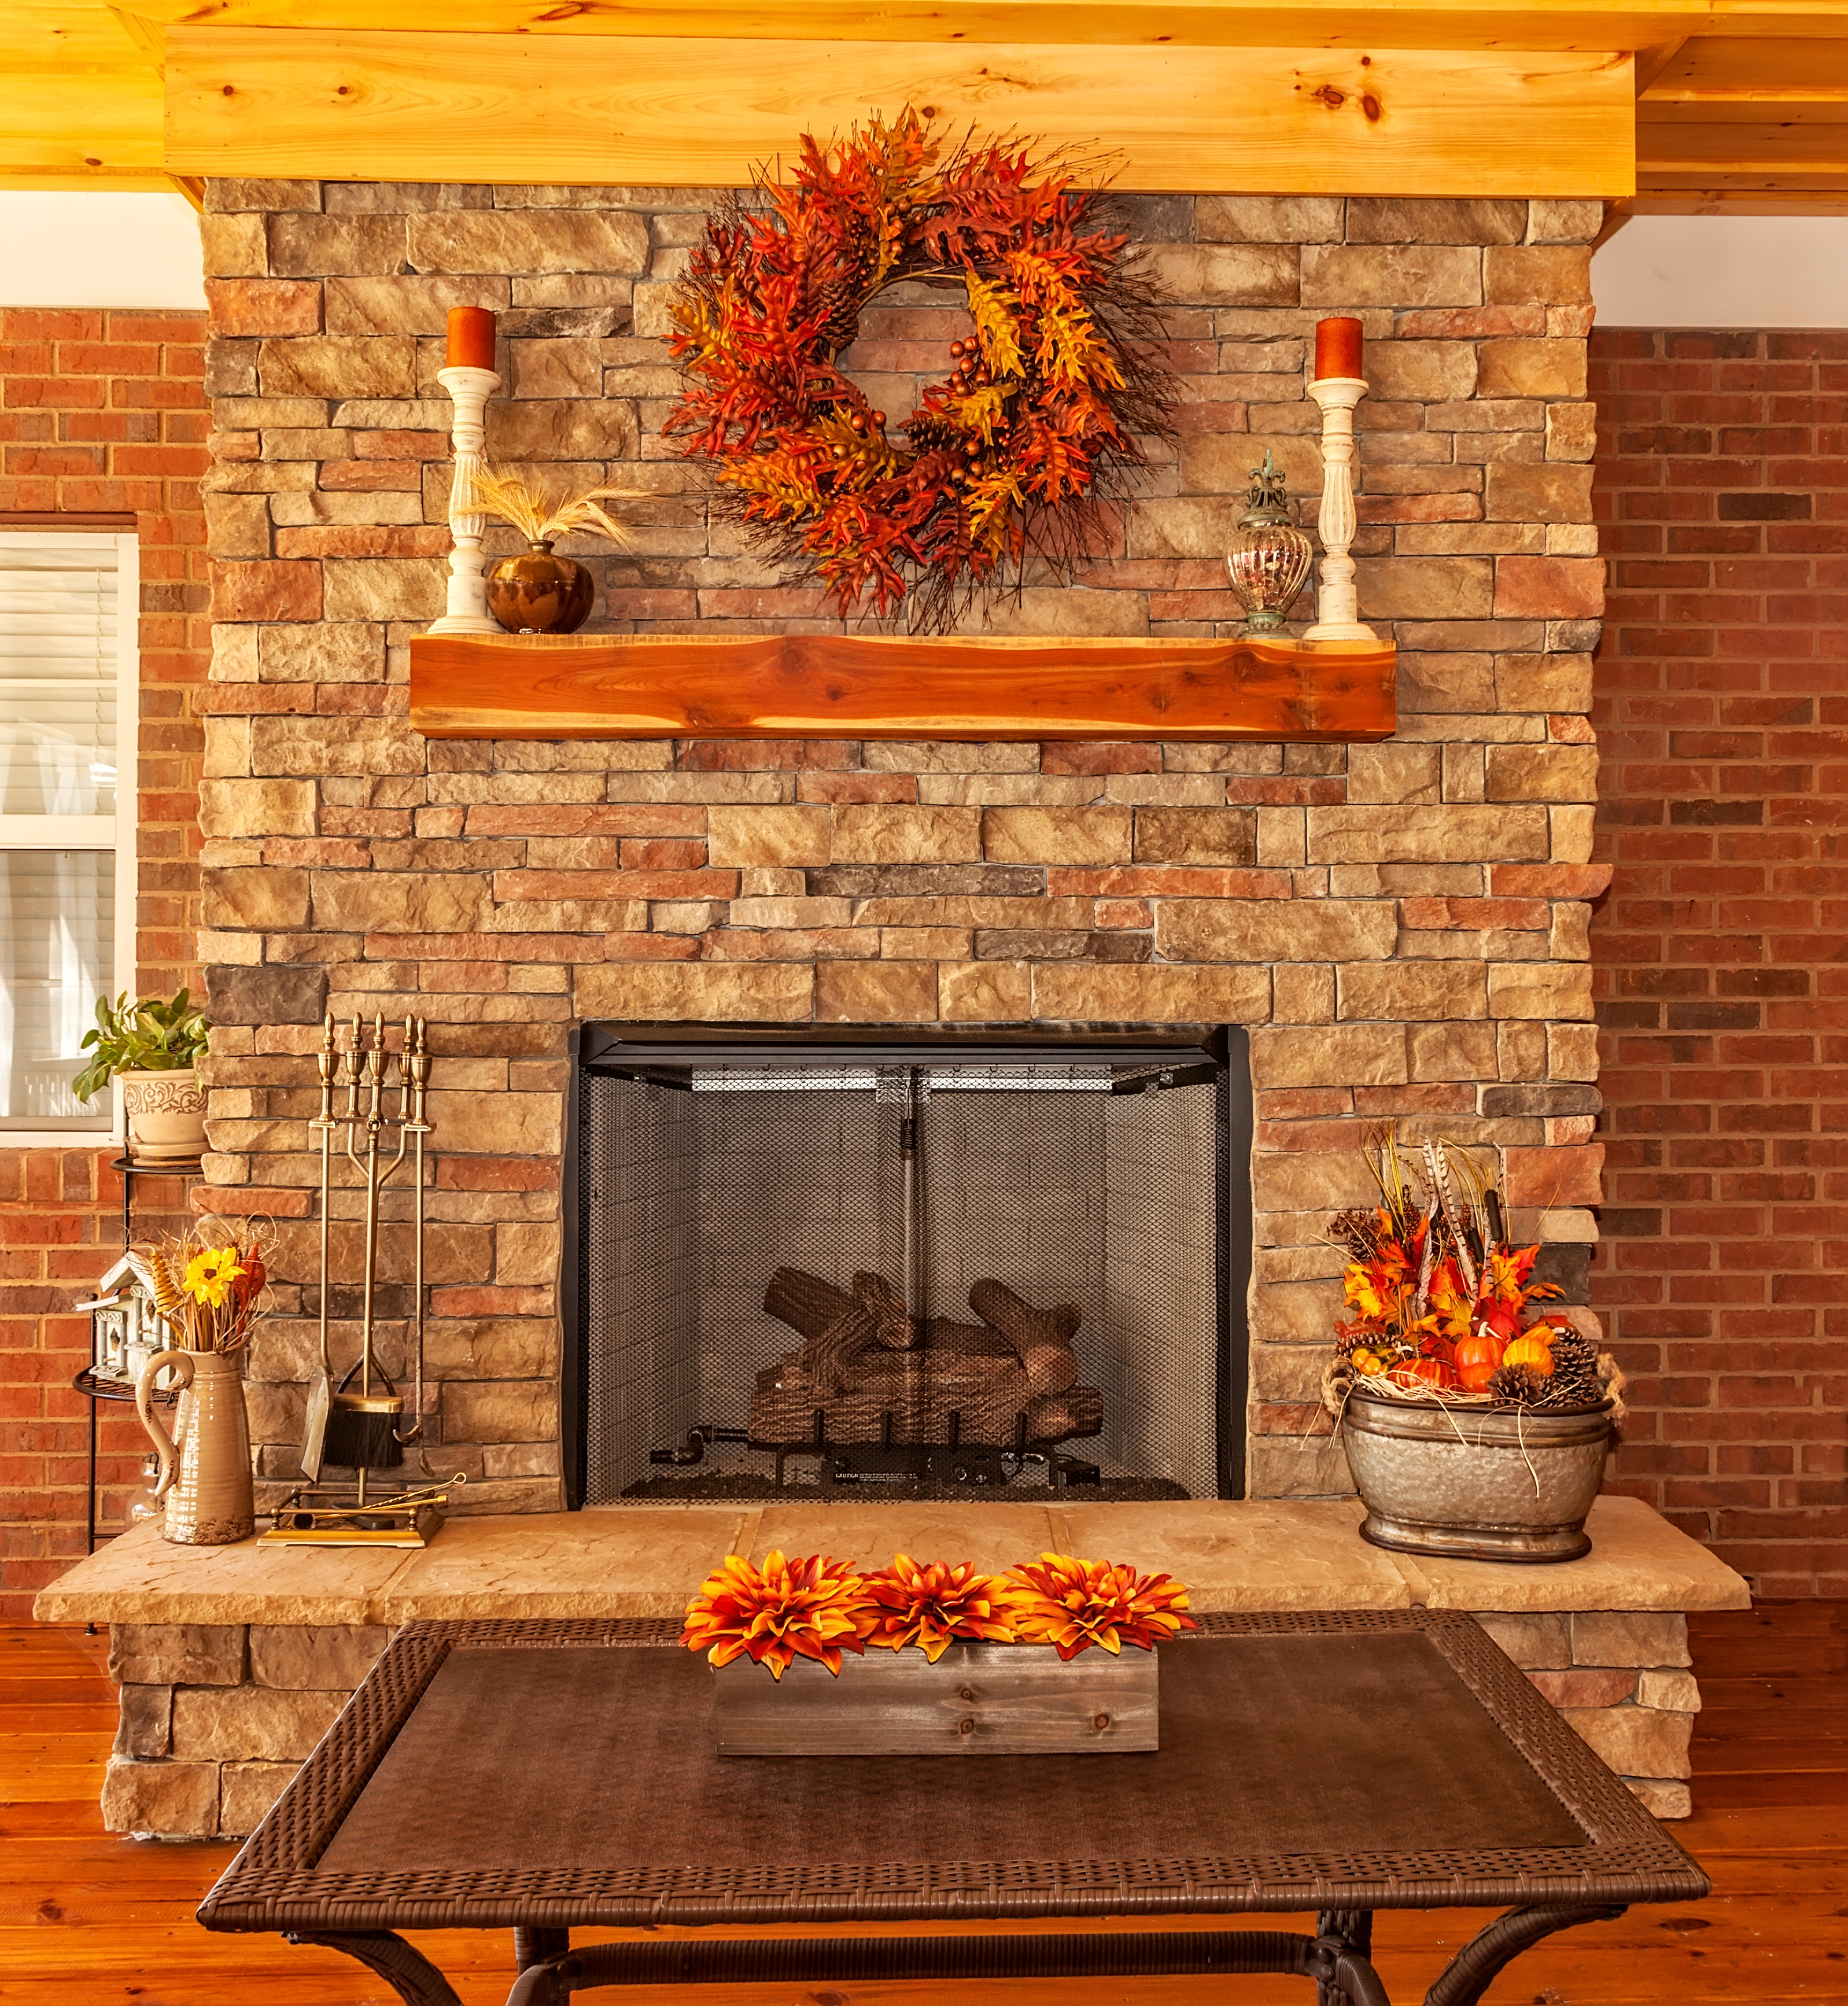 5 Fall Mantel Decorating Ideas That'll Make You Look Like a Pro 5